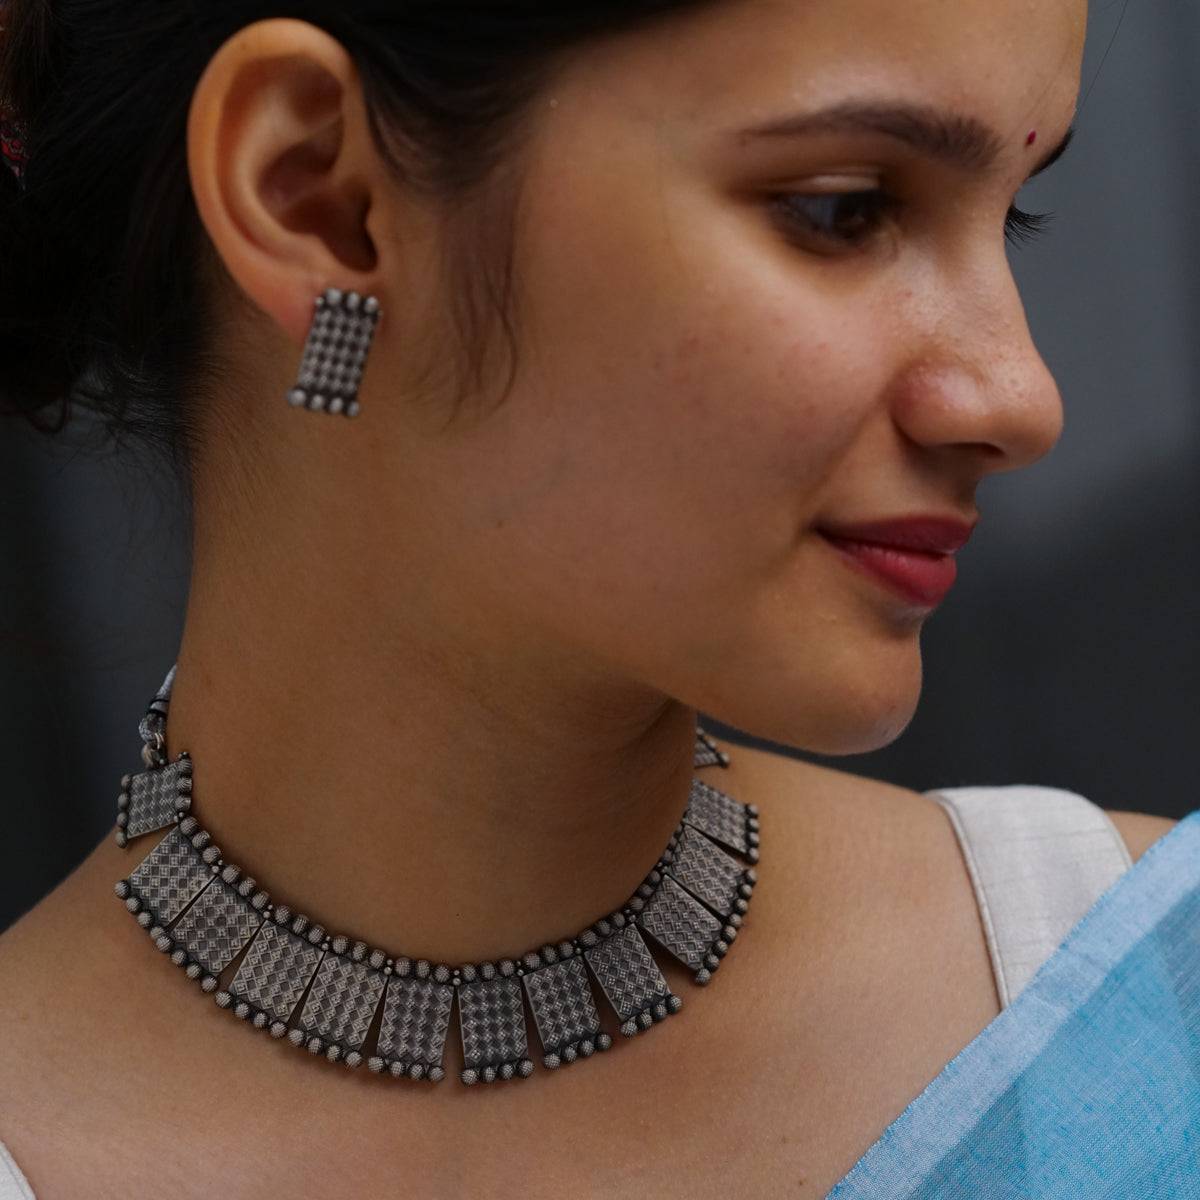 a close up of a woman wearing a necklace and earrings